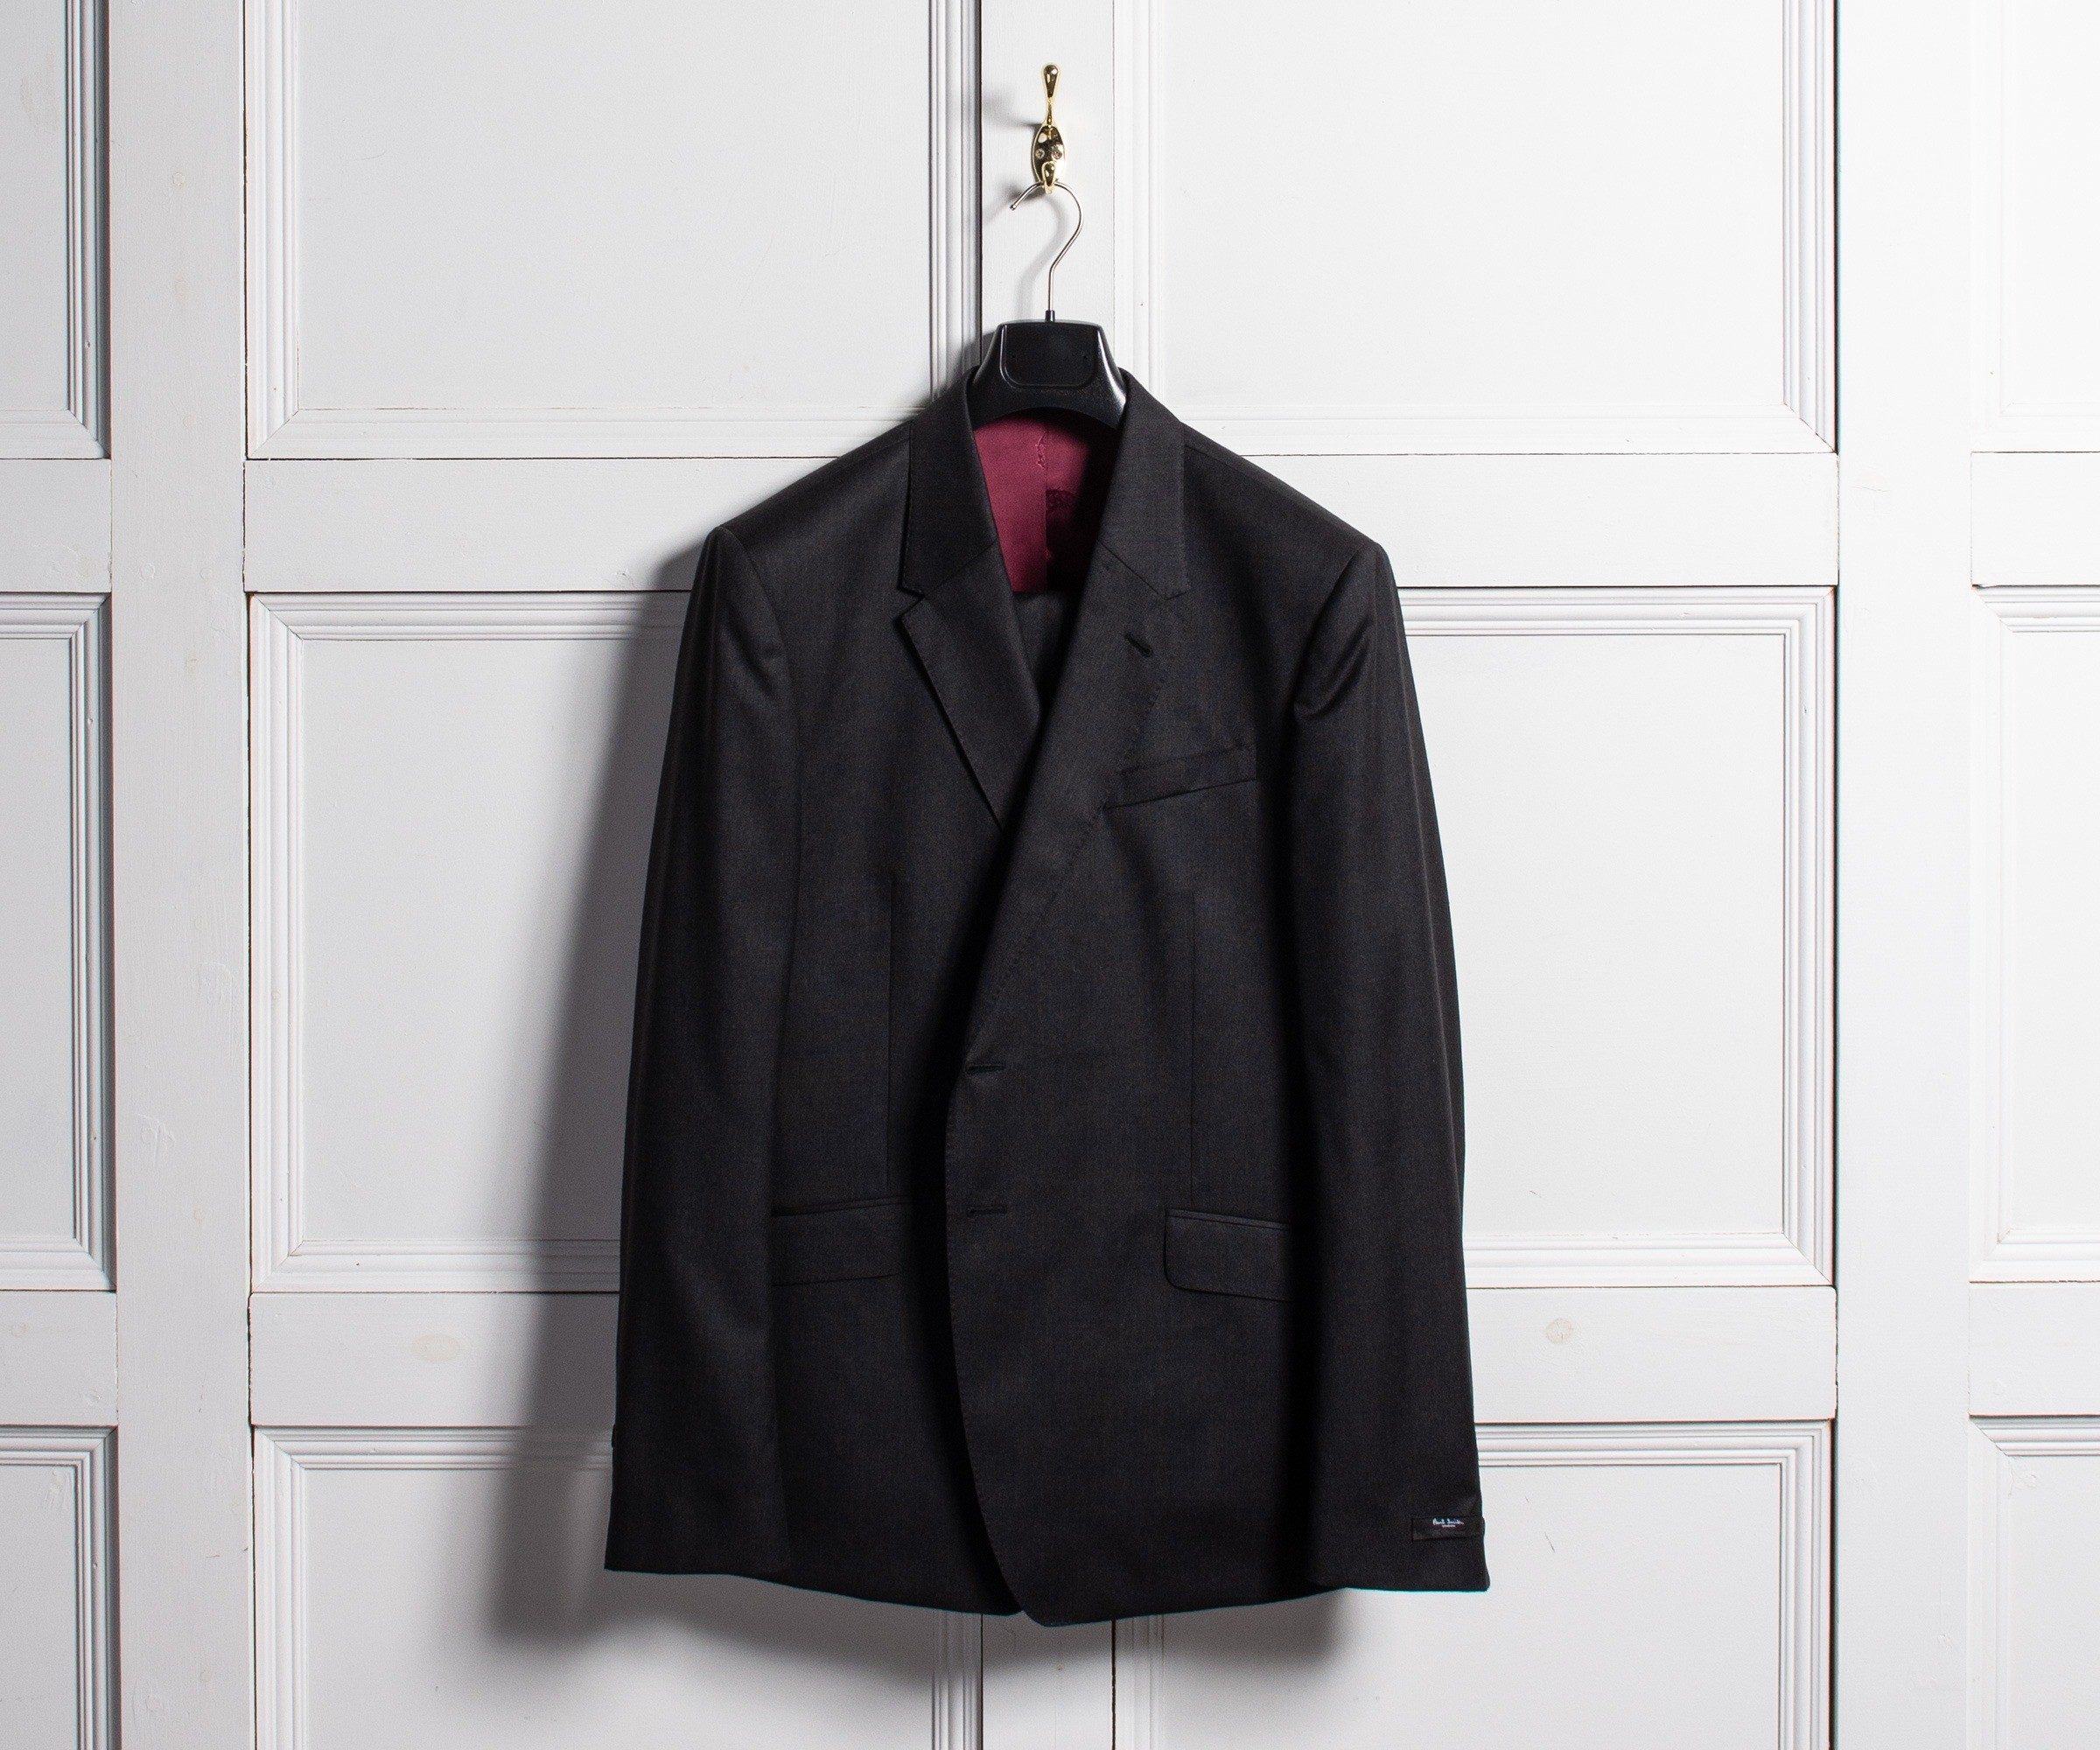 Paul Smith 'Westbourne' Regular Fit Wool Suit Charcoal